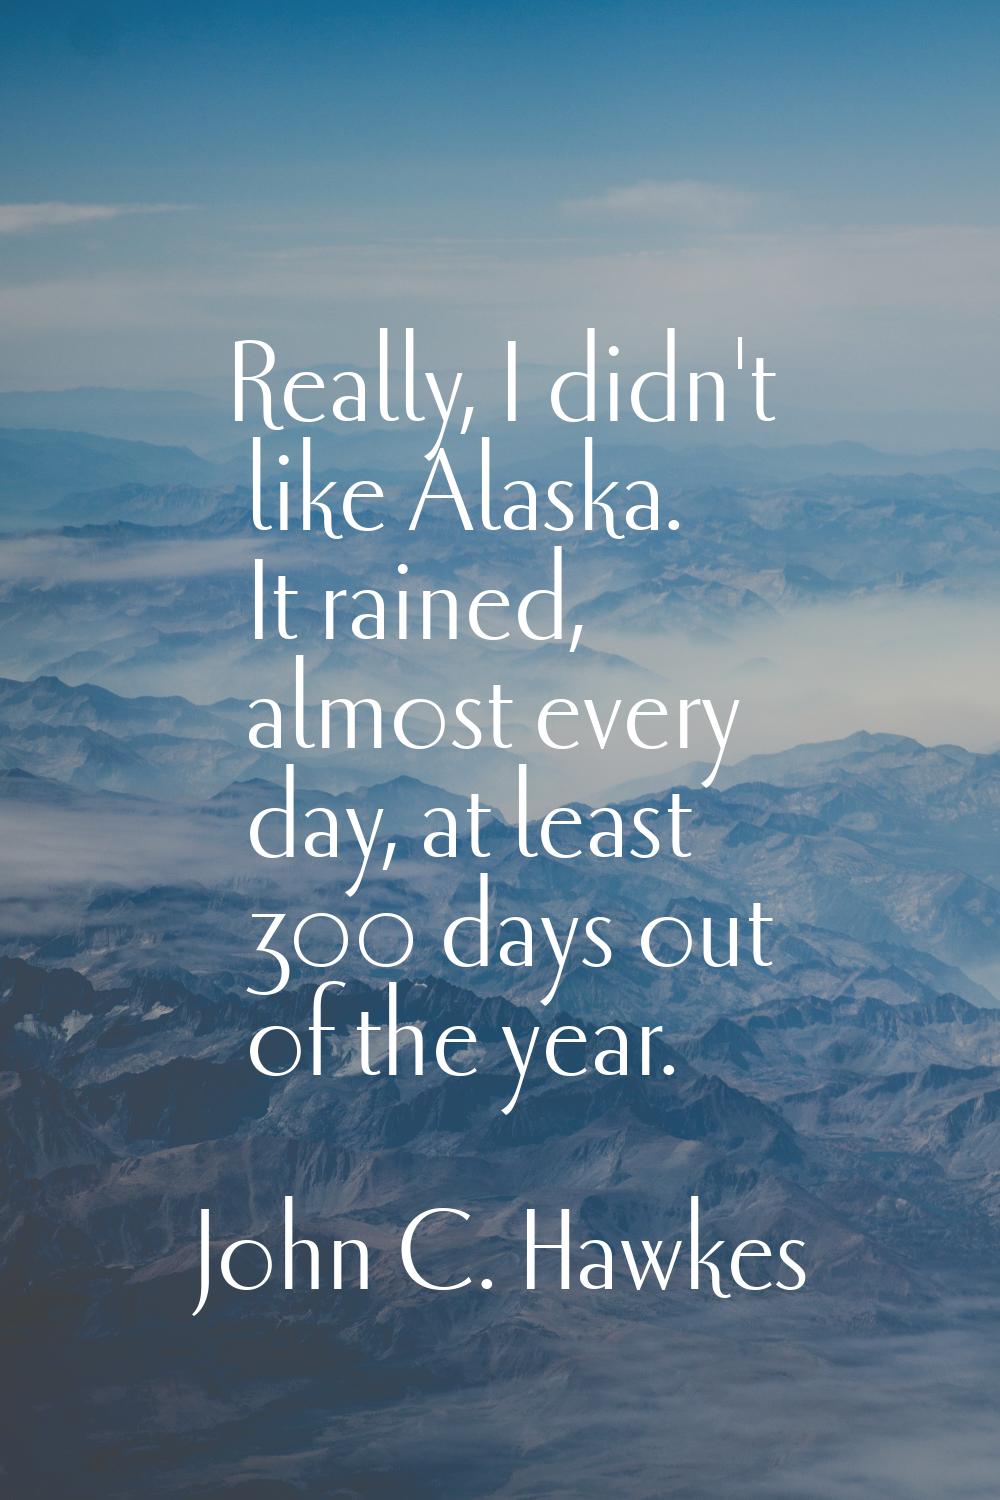 Really, I didn't like Alaska. It rained, almost every day, at least 300 days out of the year.